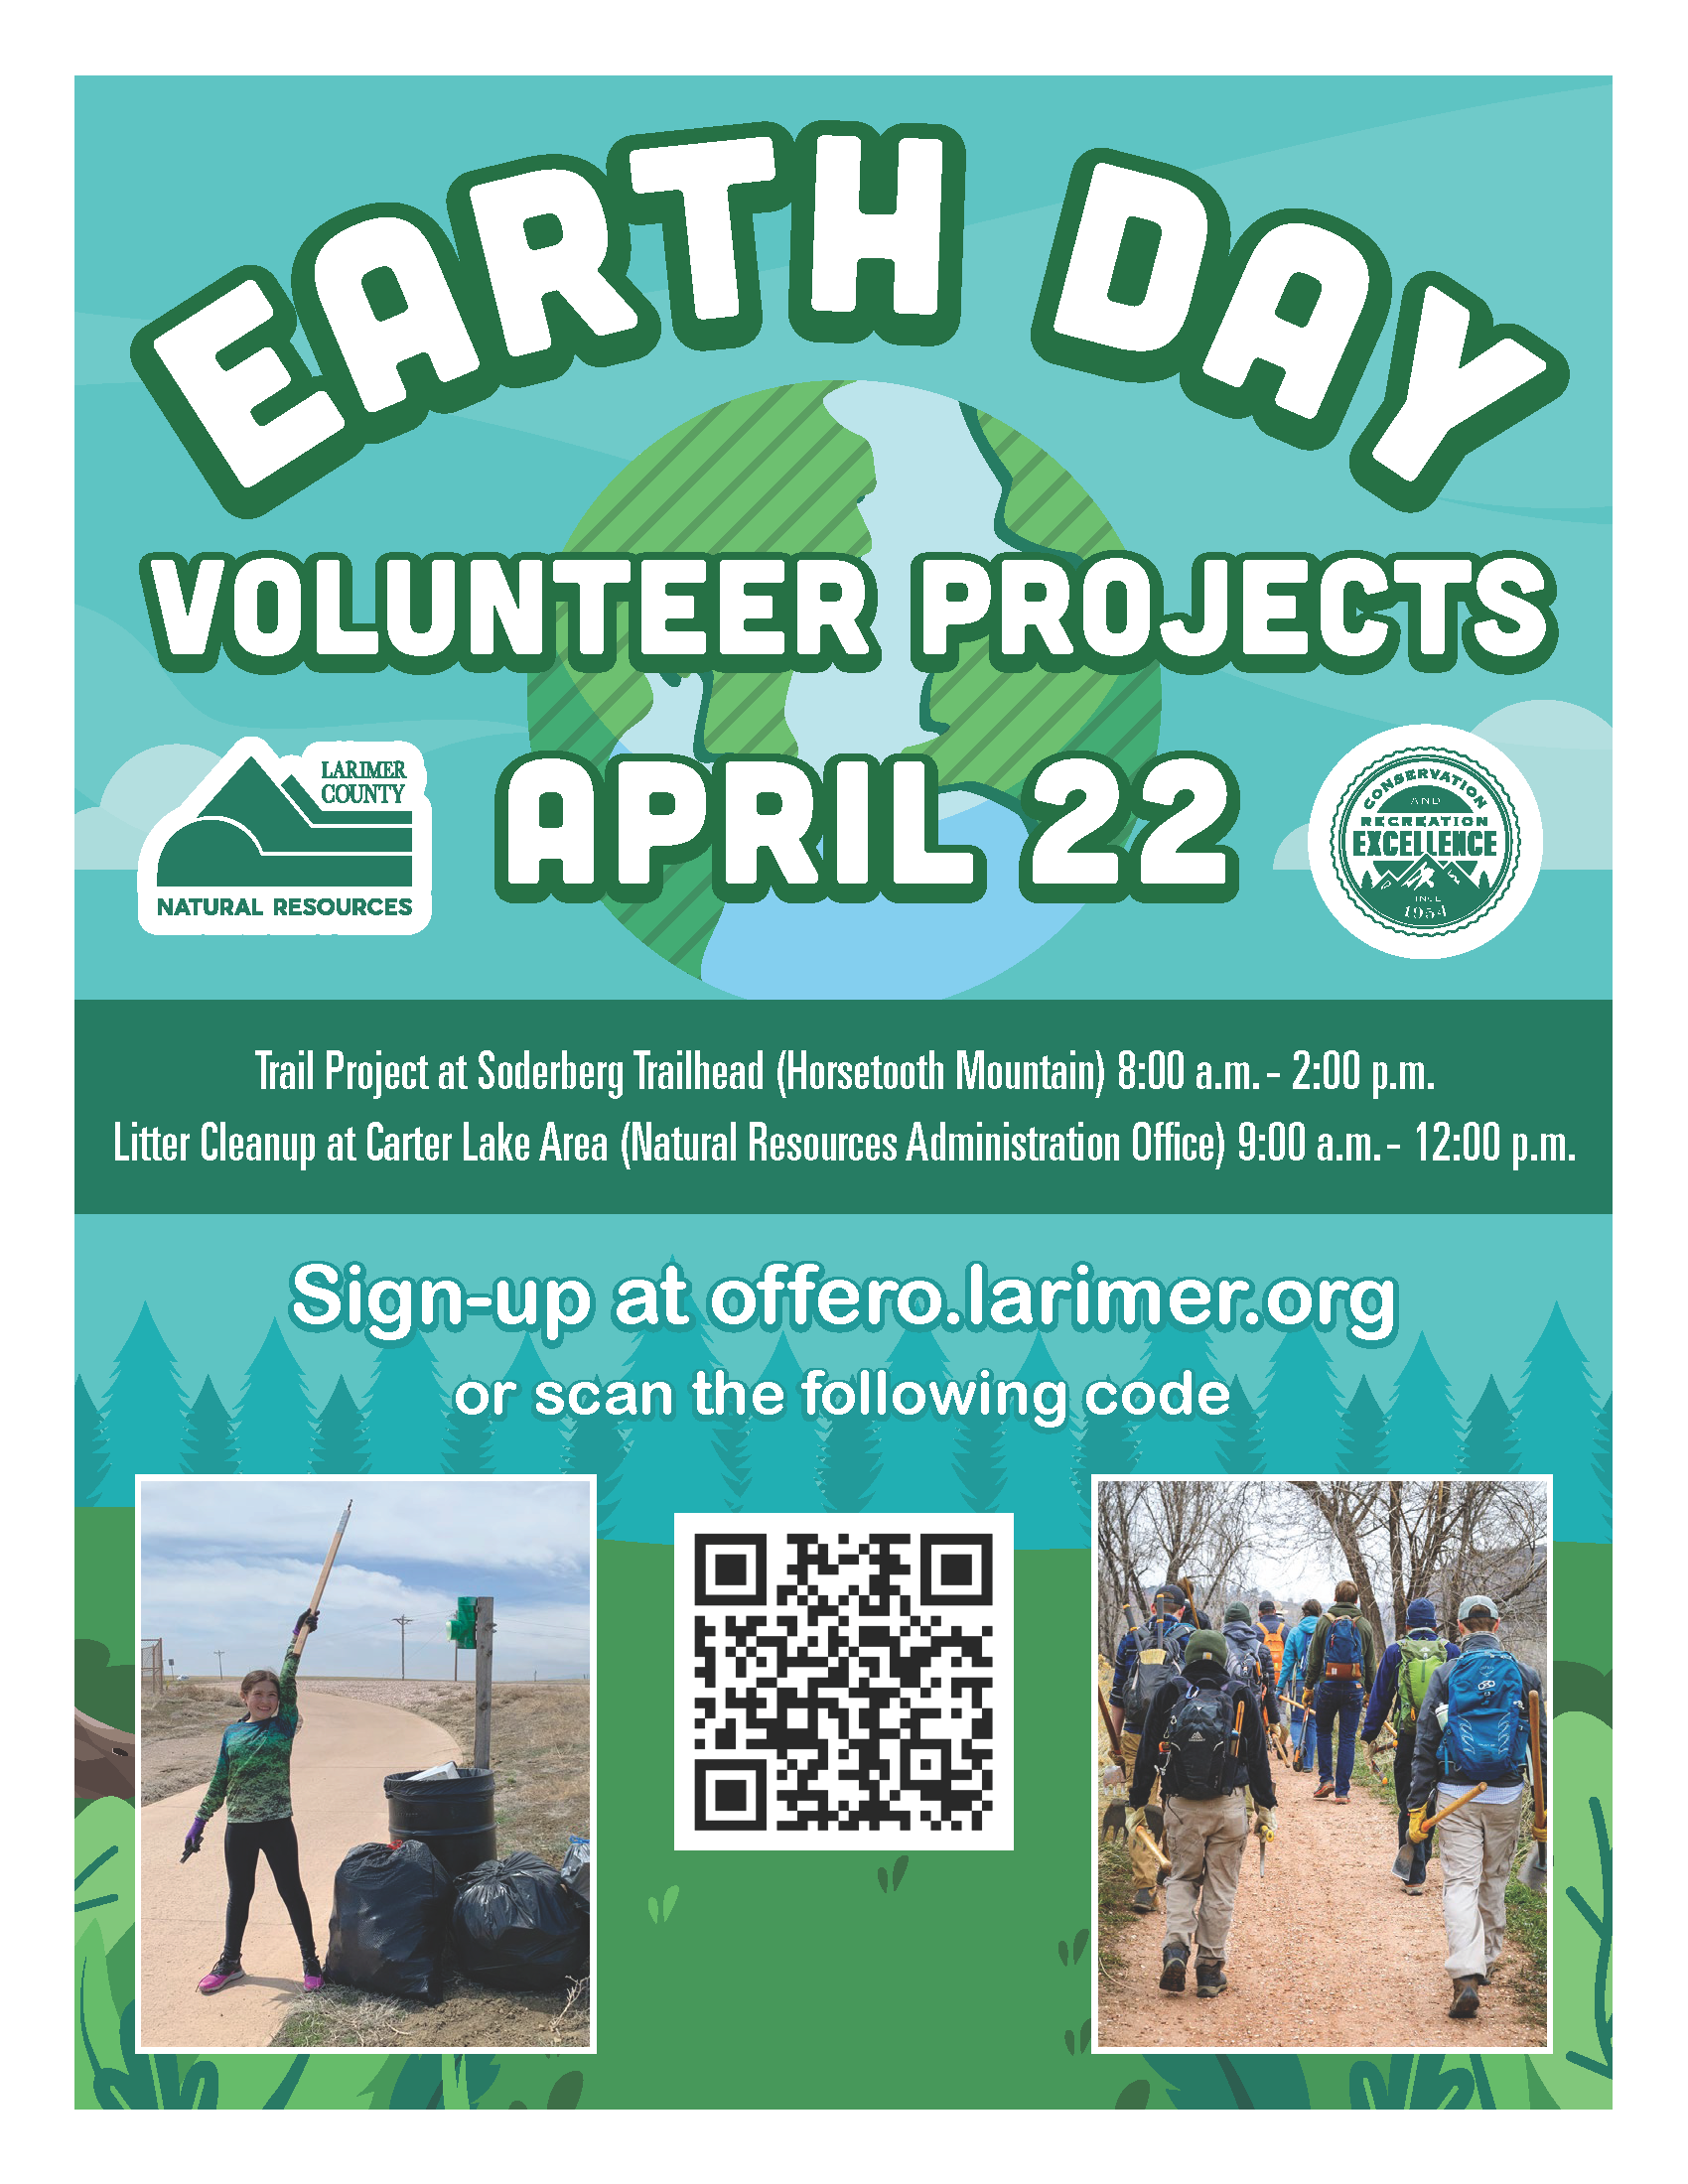 Image 1: Volunteer opportunities for Earth day, April 22. Trail project at Soderberg Trailhead and litter cleanup at Carter Lake Area.